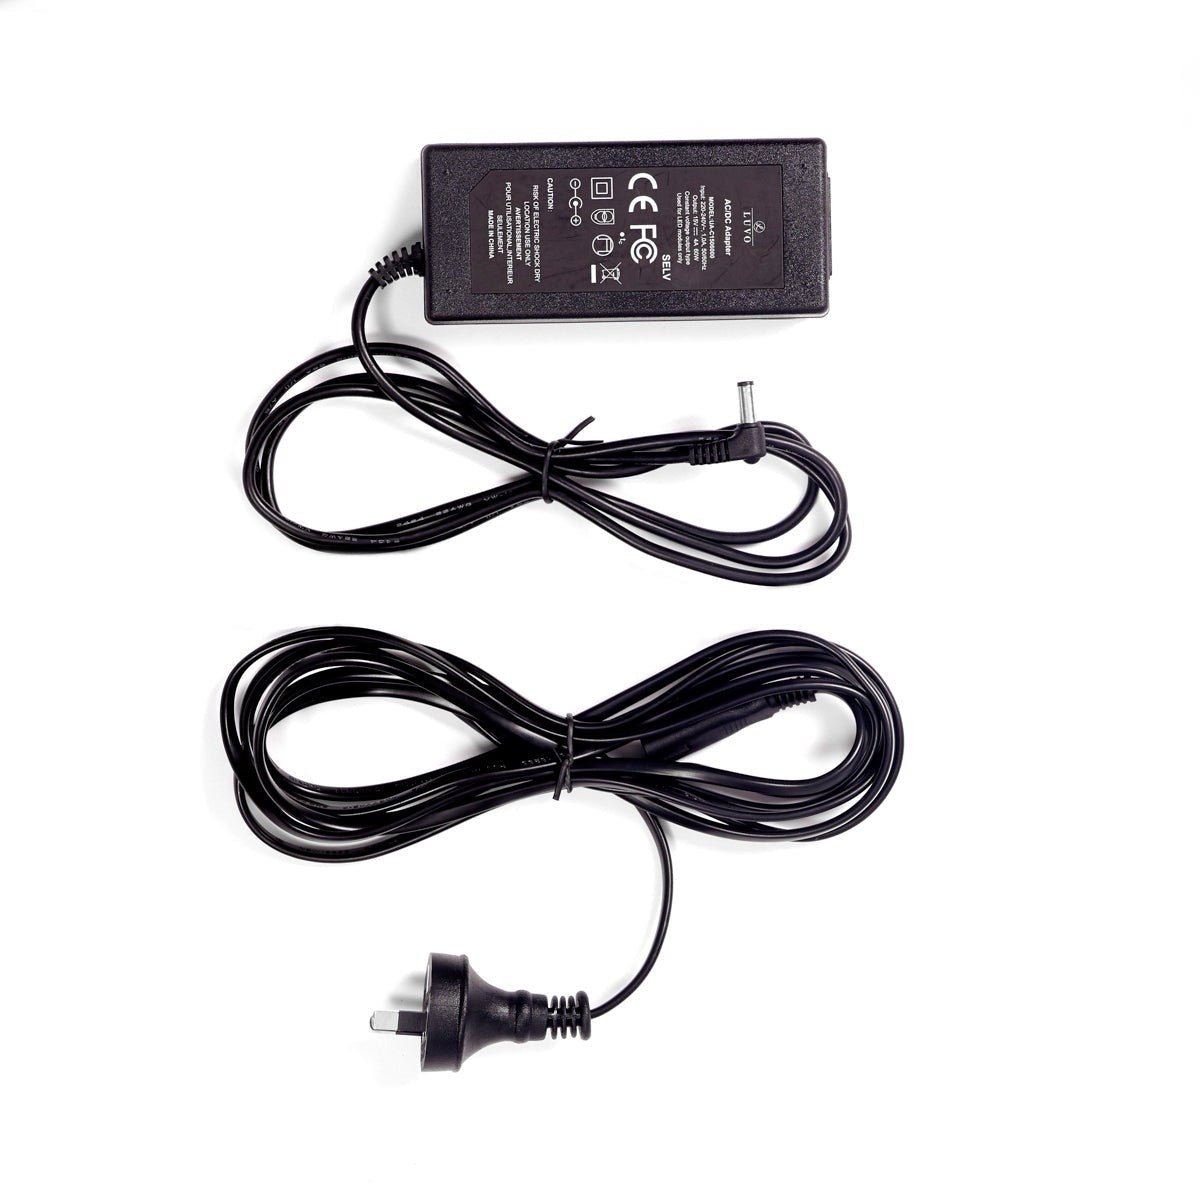 AC Adapter for GlowPro 3 Luvo Store 